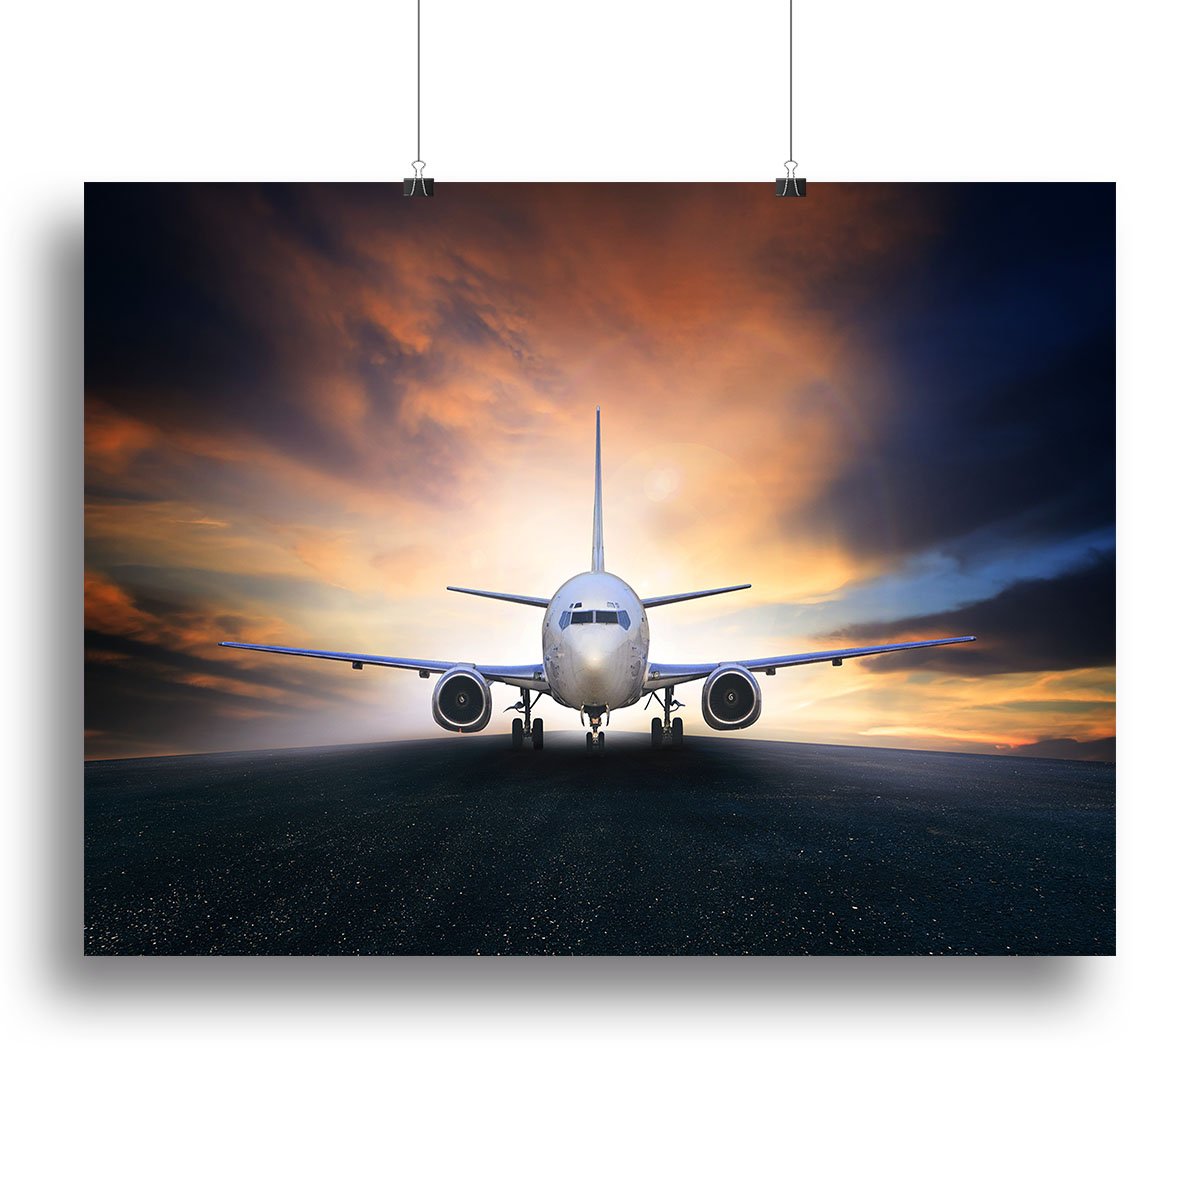 air plane preparing to take off Canvas Print or Poster